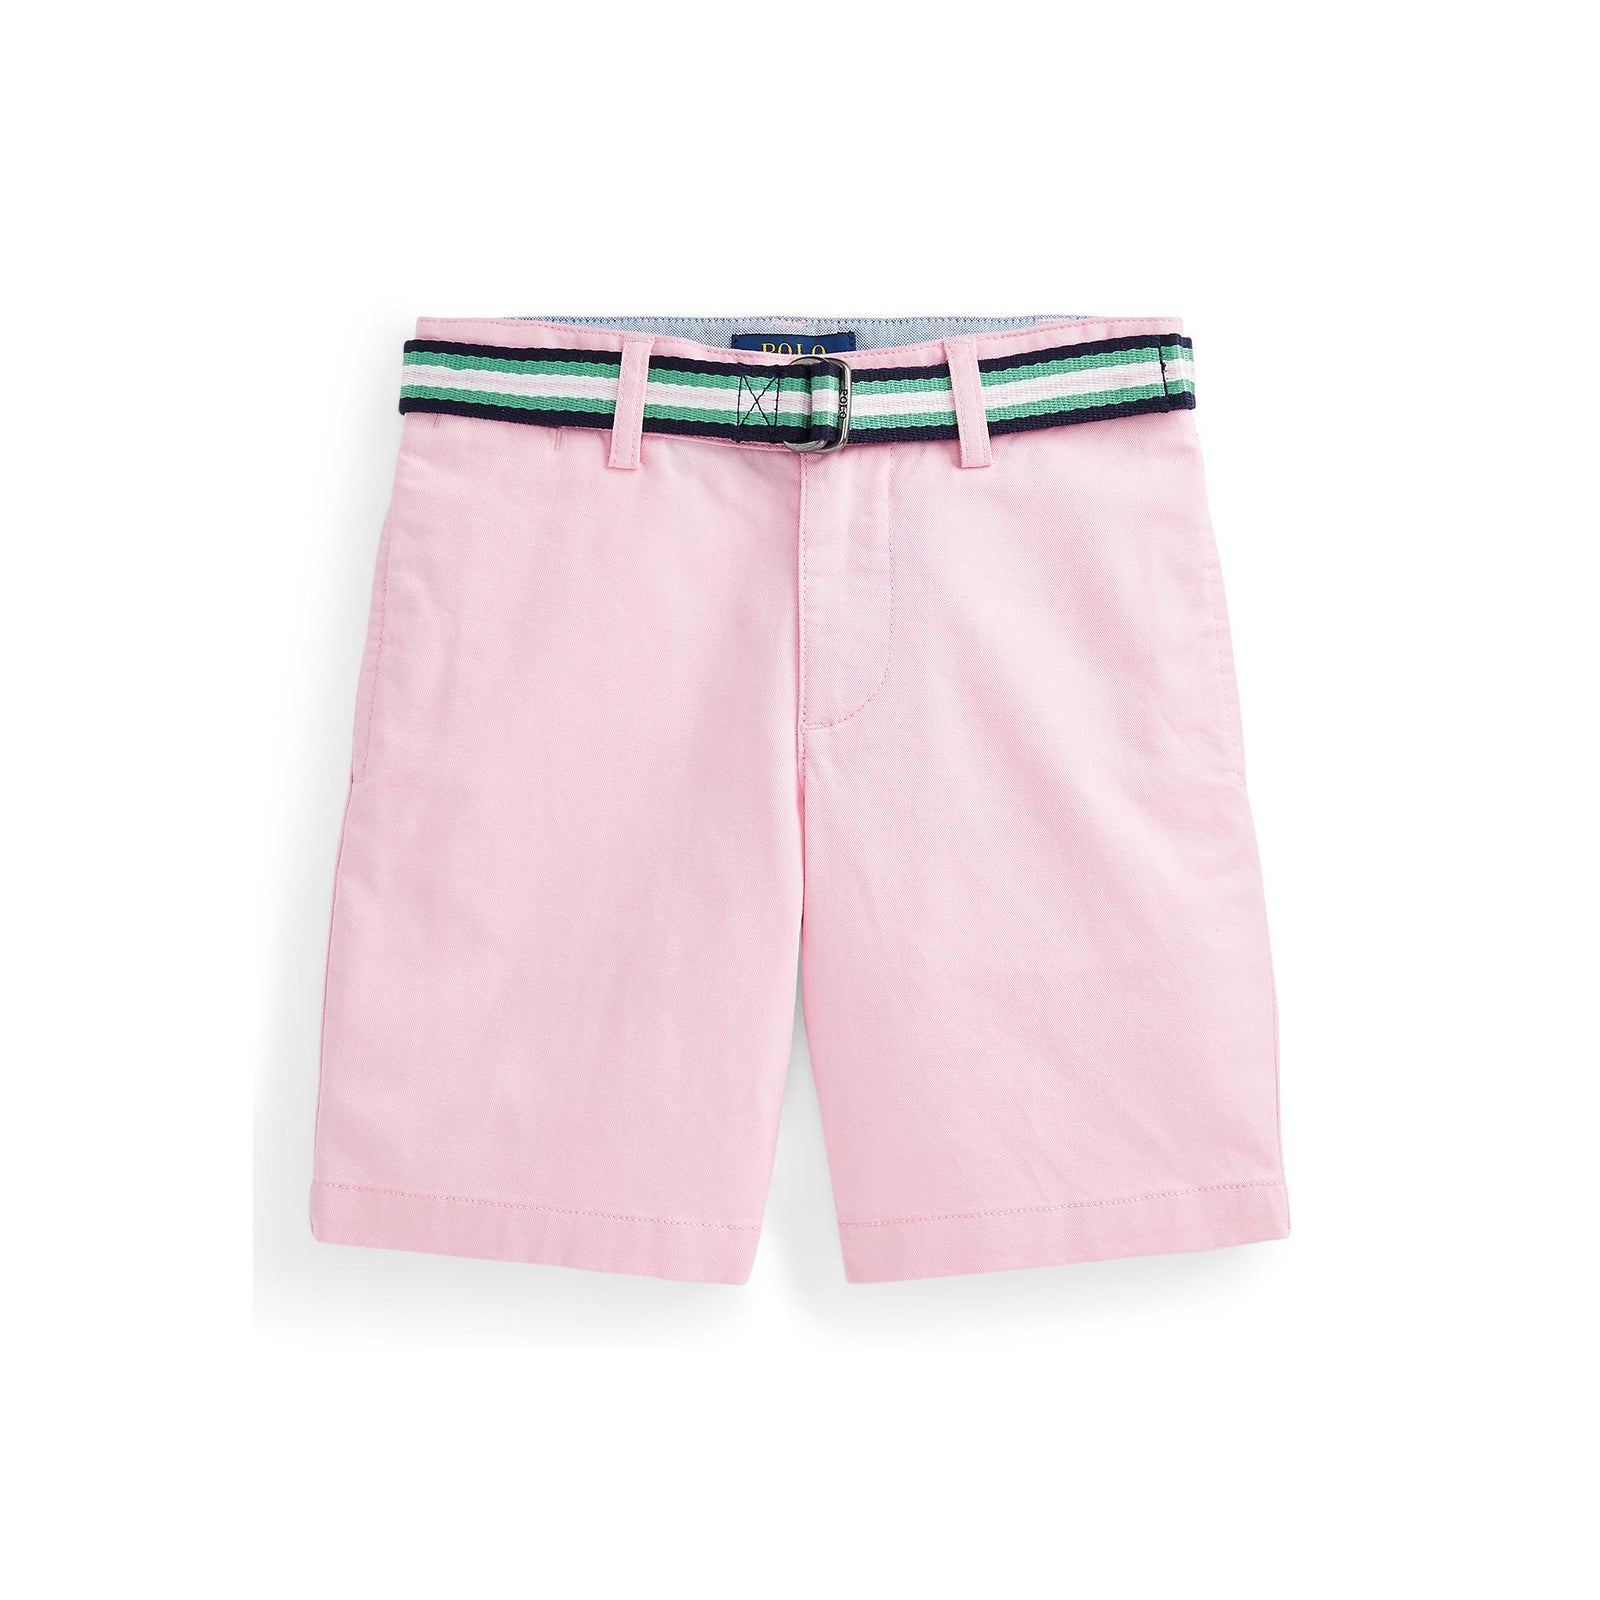 SLIM FIT BELTED CHINO SHORT - Yooto